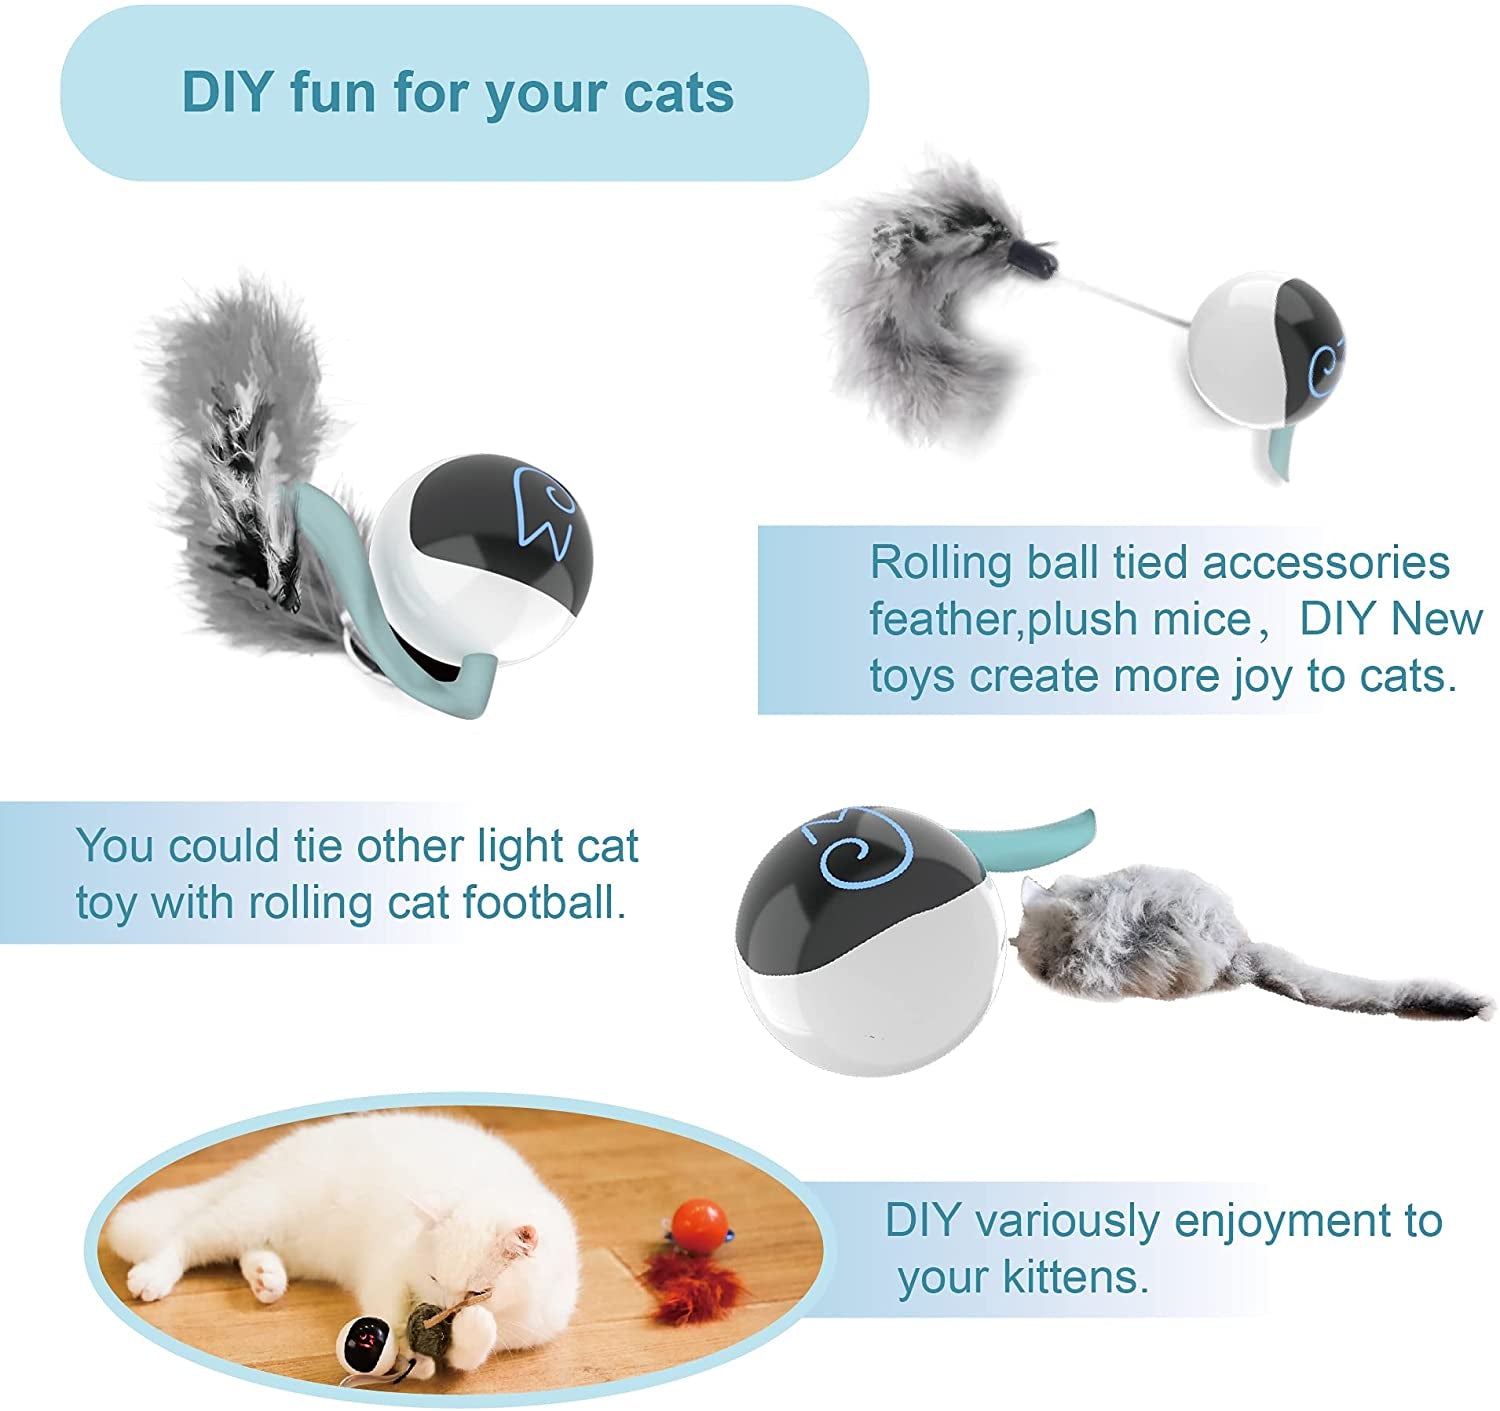 Cat Toys, Automatic Moving Ball Bundle Classic Mice + Feather Kitten Toys in Pack. DIY N in 1 Pets Smart Electric Teaser, USB Rechargeable (White)